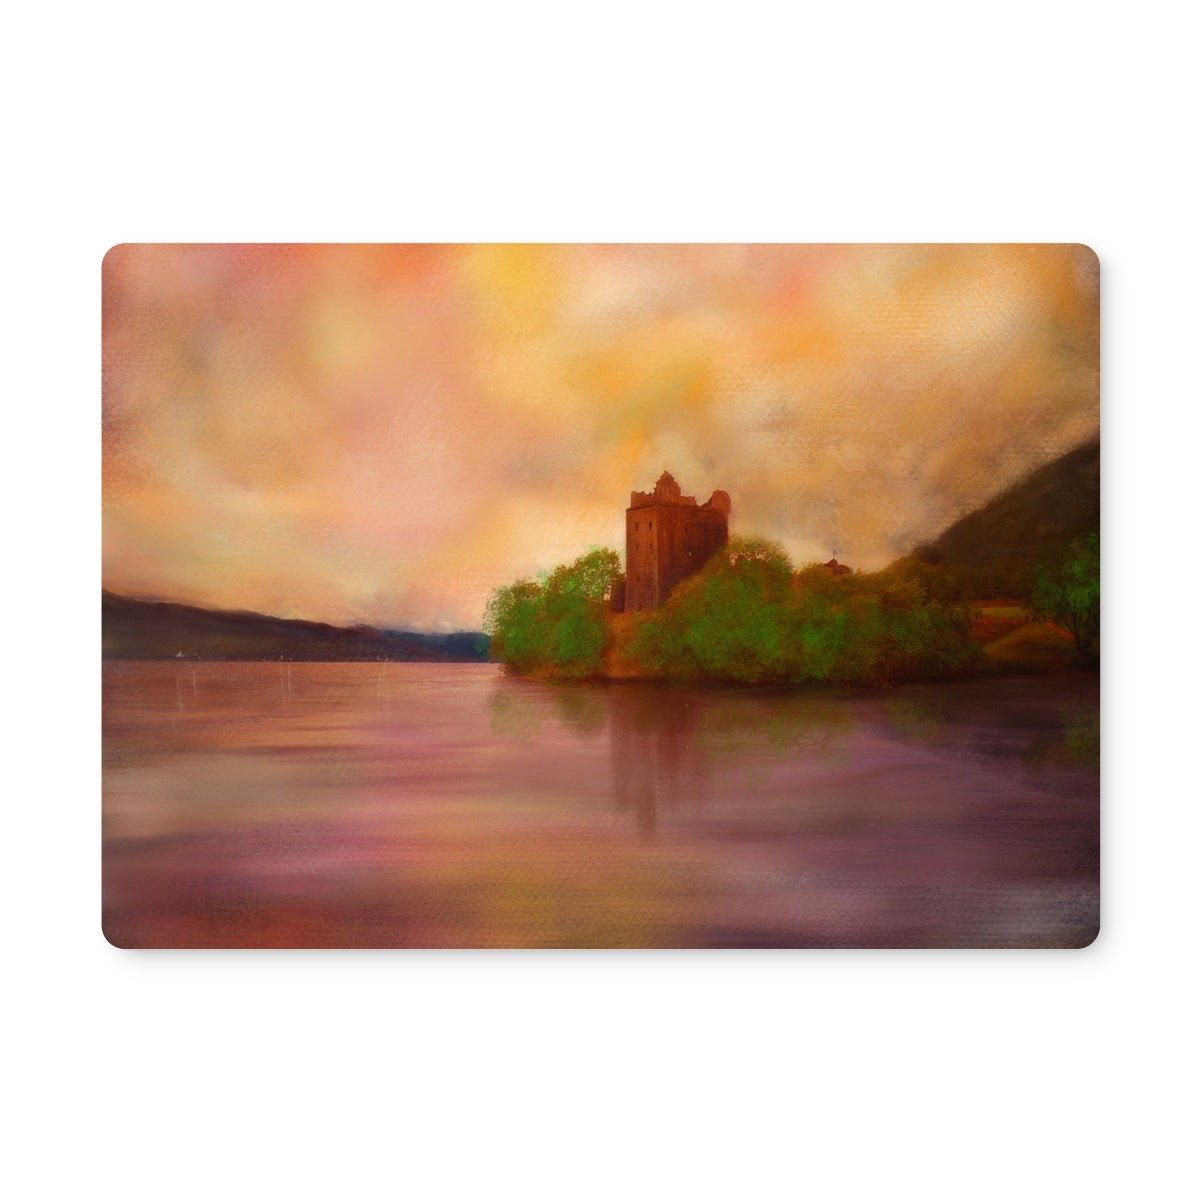 Urquhart Castle Art Gifts Placemat-Placemats-Scottish Castles Art Gallery-Single Placemat-Paintings, Prints, Homeware, Art Gifts From Scotland By Scottish Artist Kevin Hunter